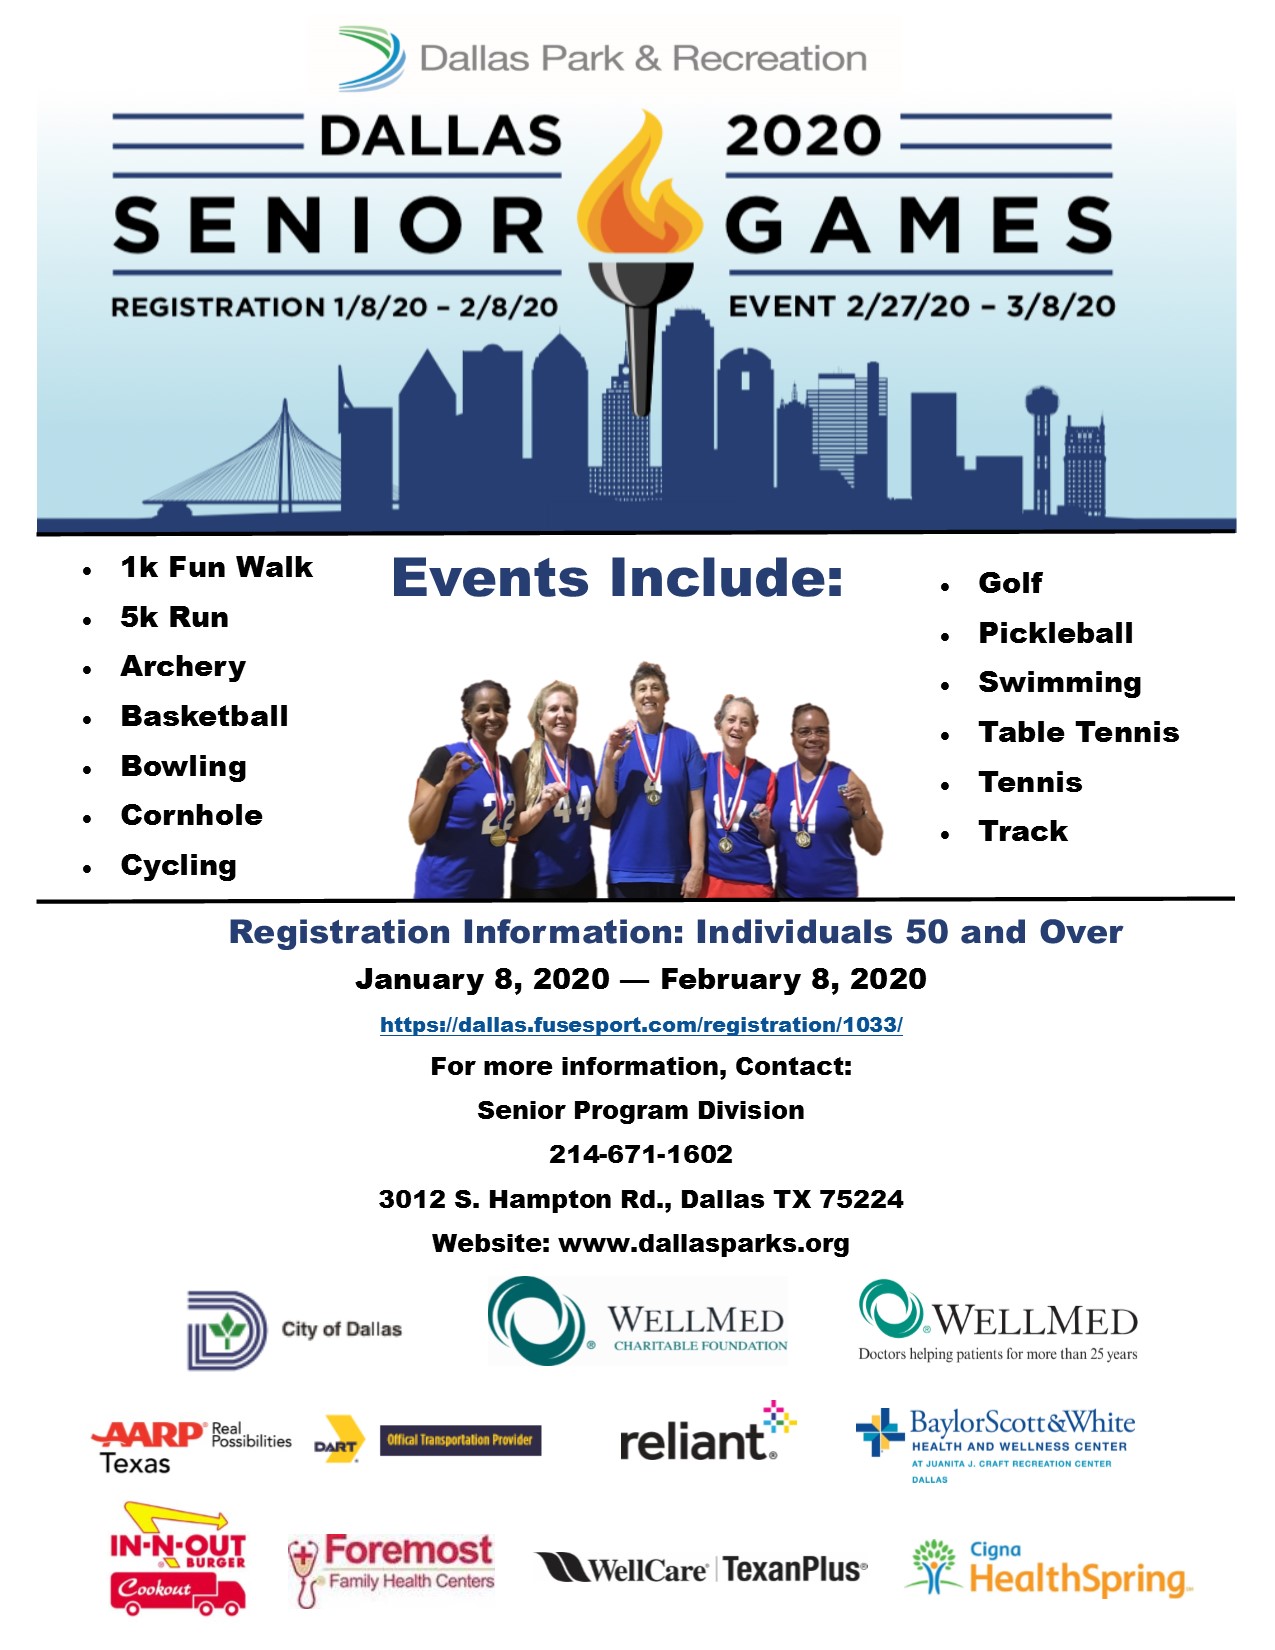 DFWTT Dallas Ft Worth Table Tennis, Club, Tournaments, Leagues and